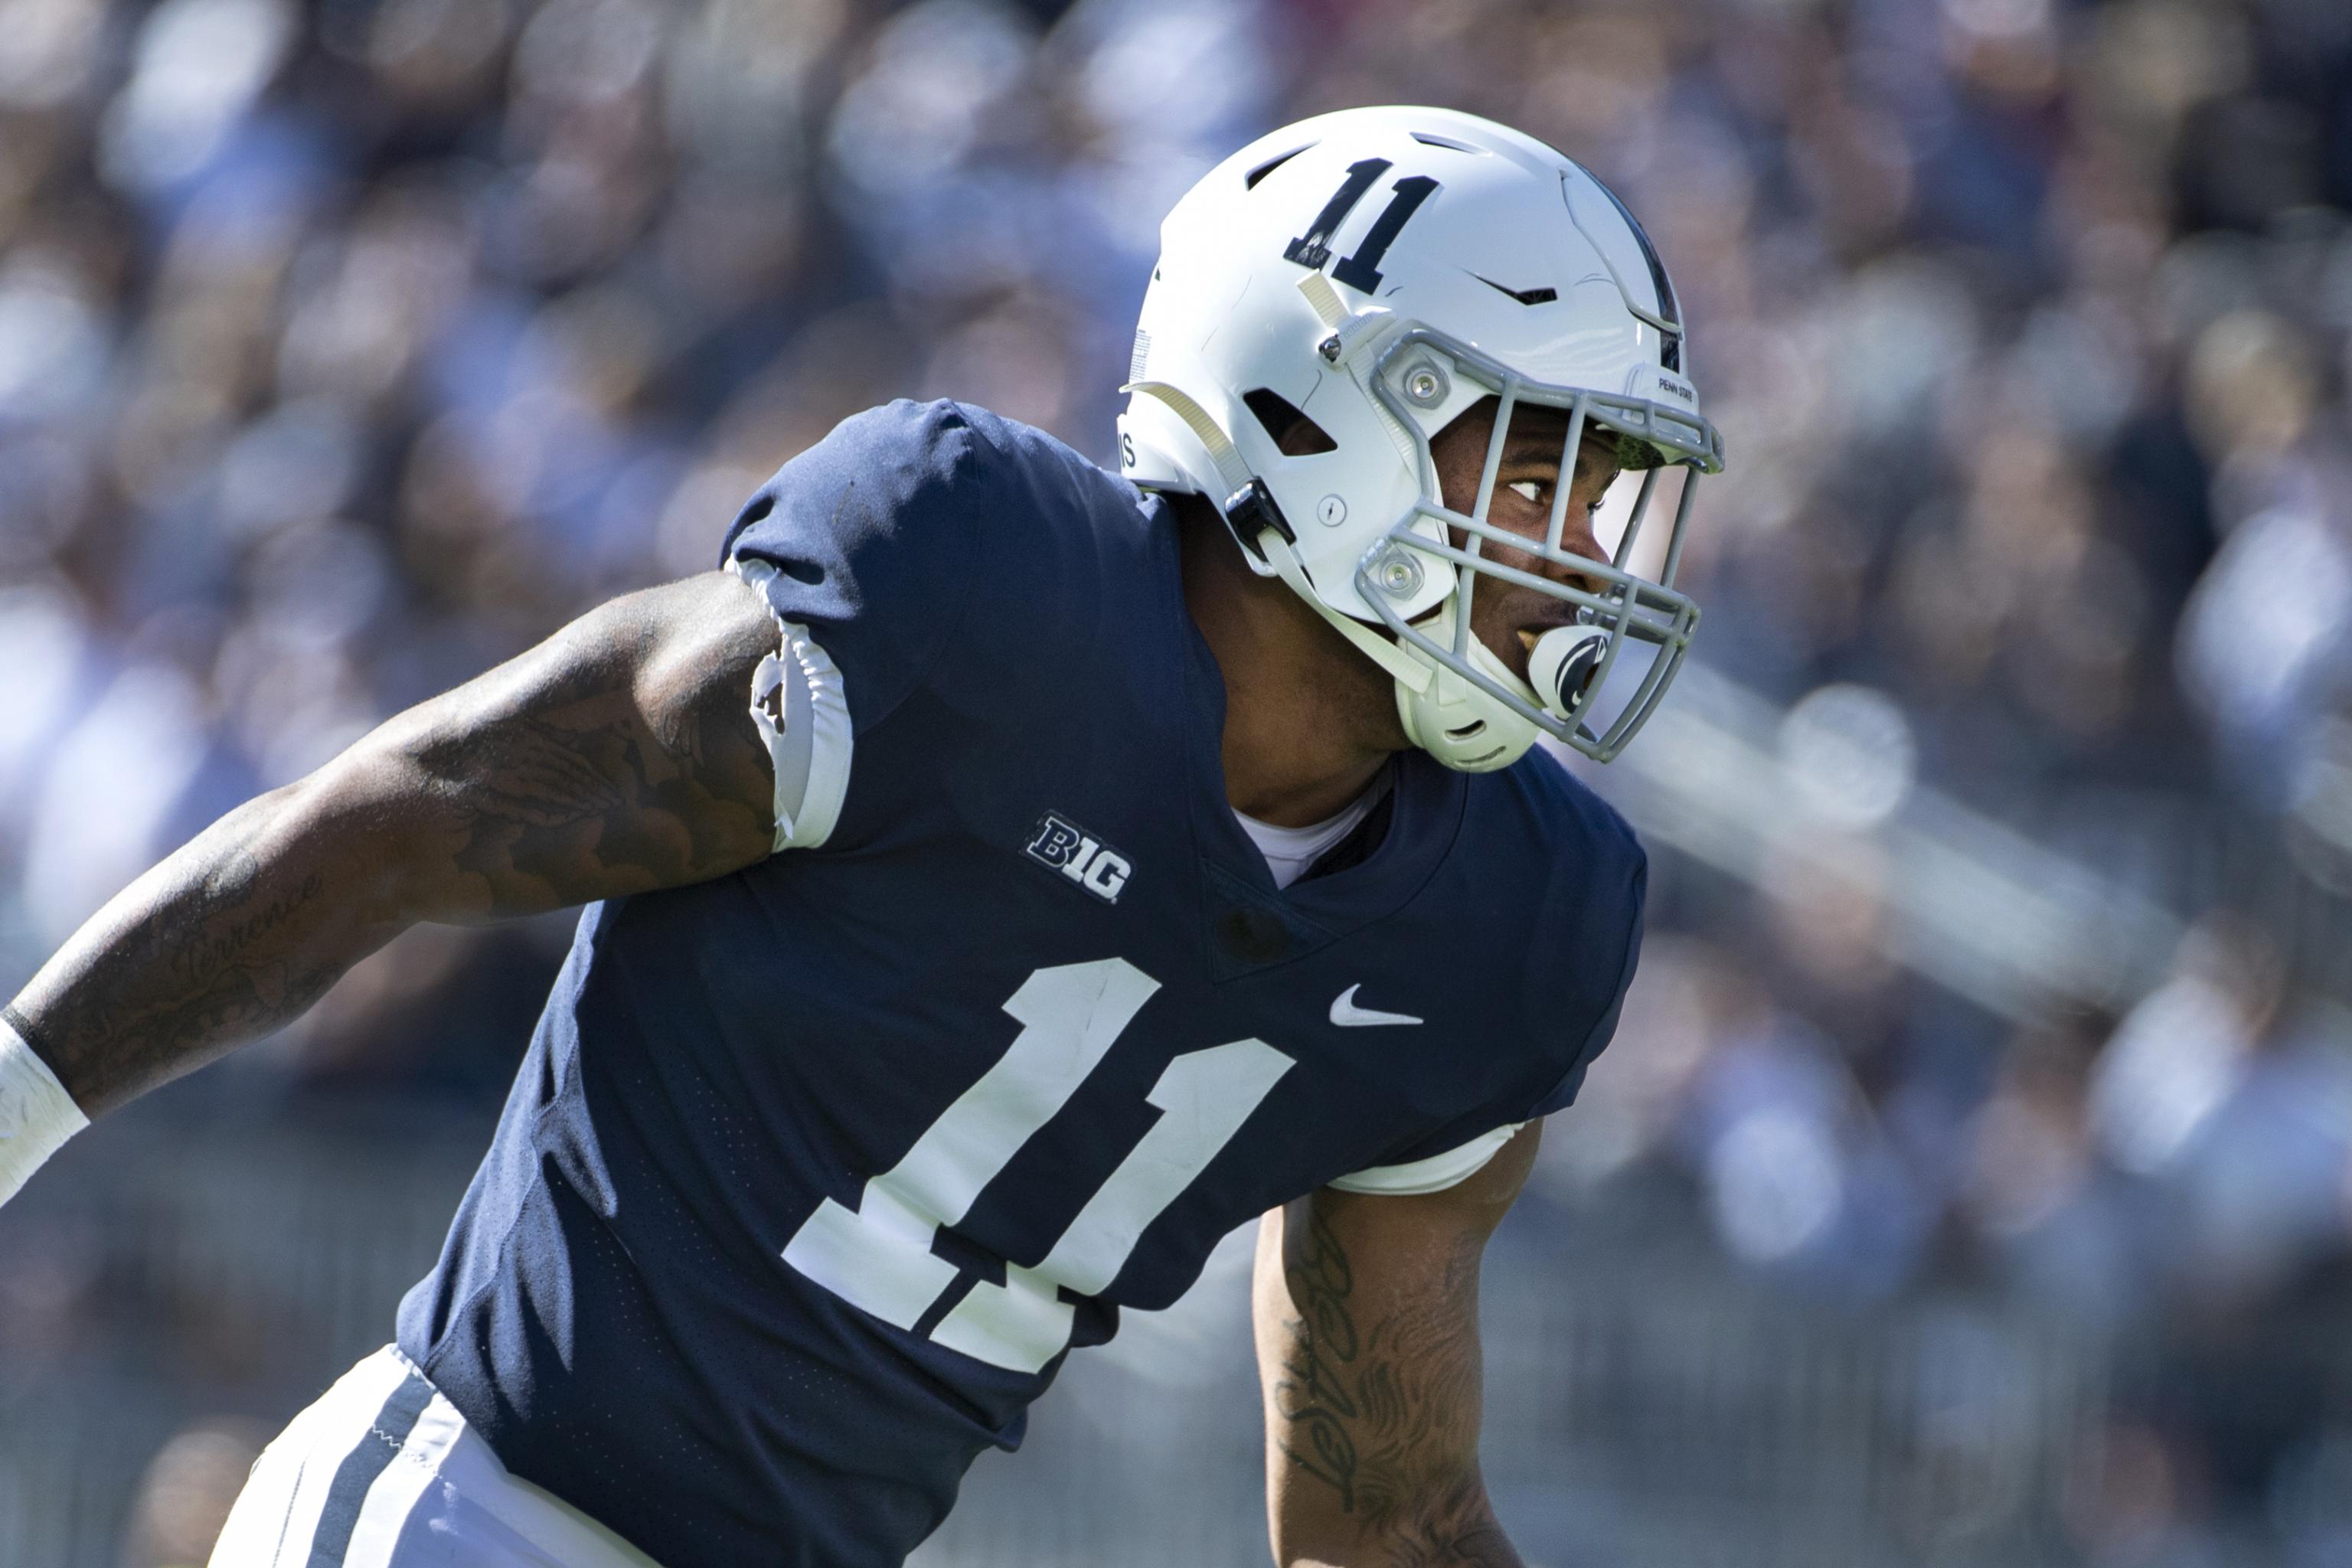 Could Micah Parsons return to Penn State? James Franklin won't rule it out